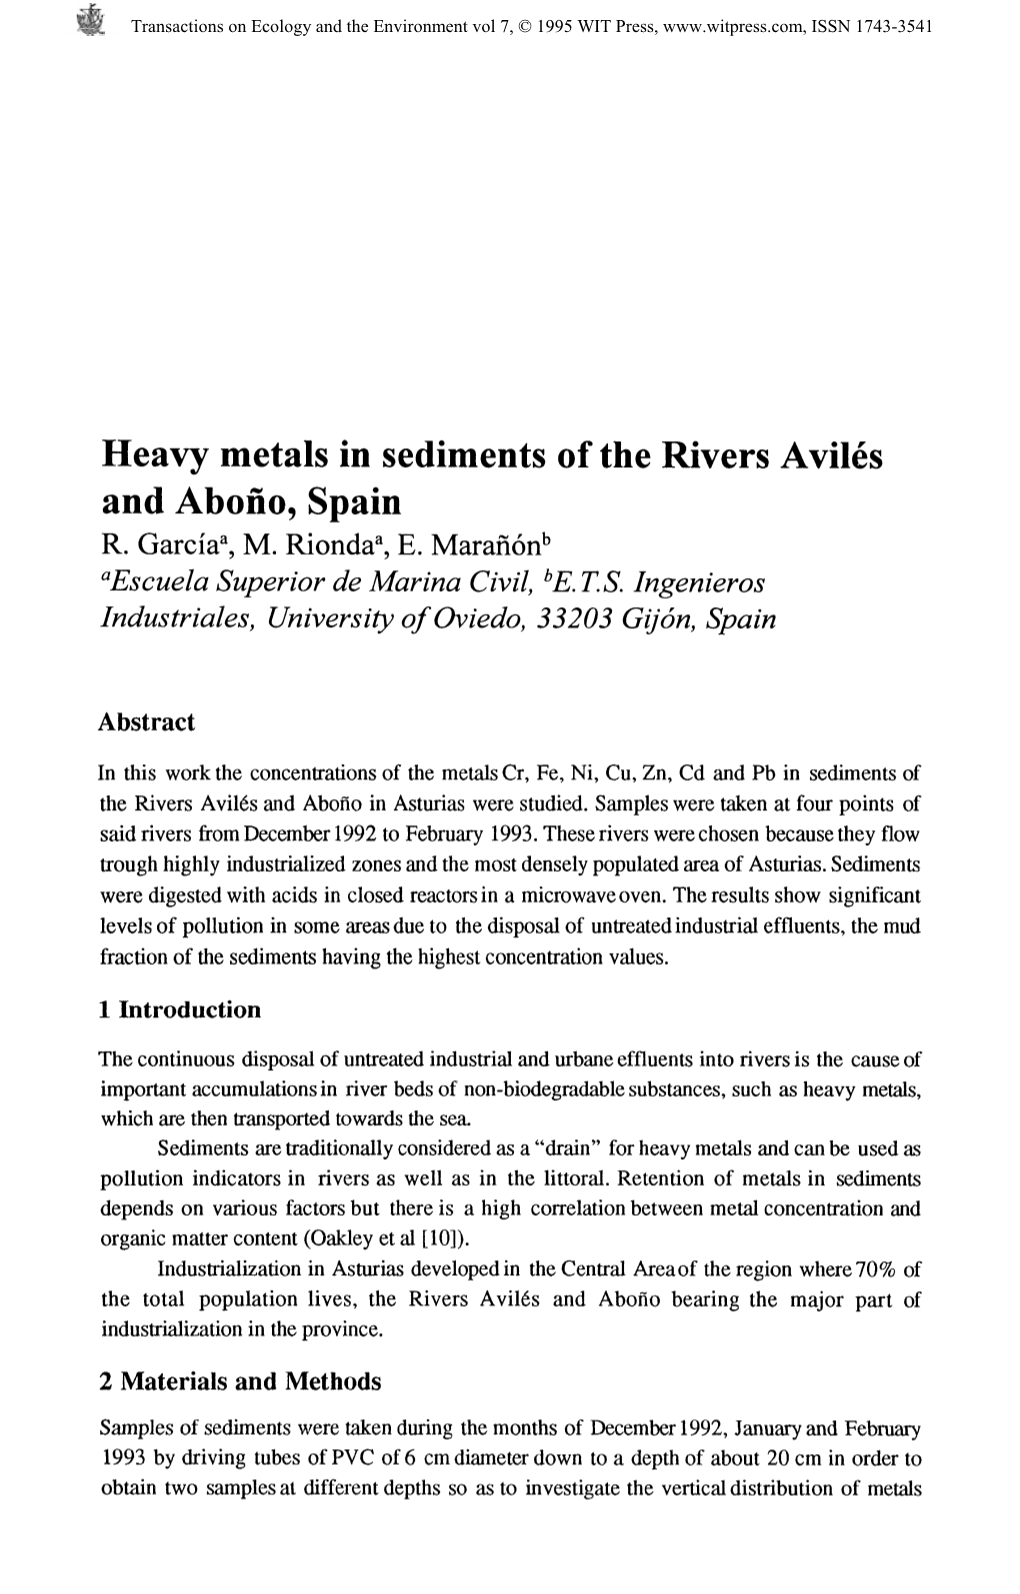 Heavy Metals in Sediments of the Rivers Aviles And